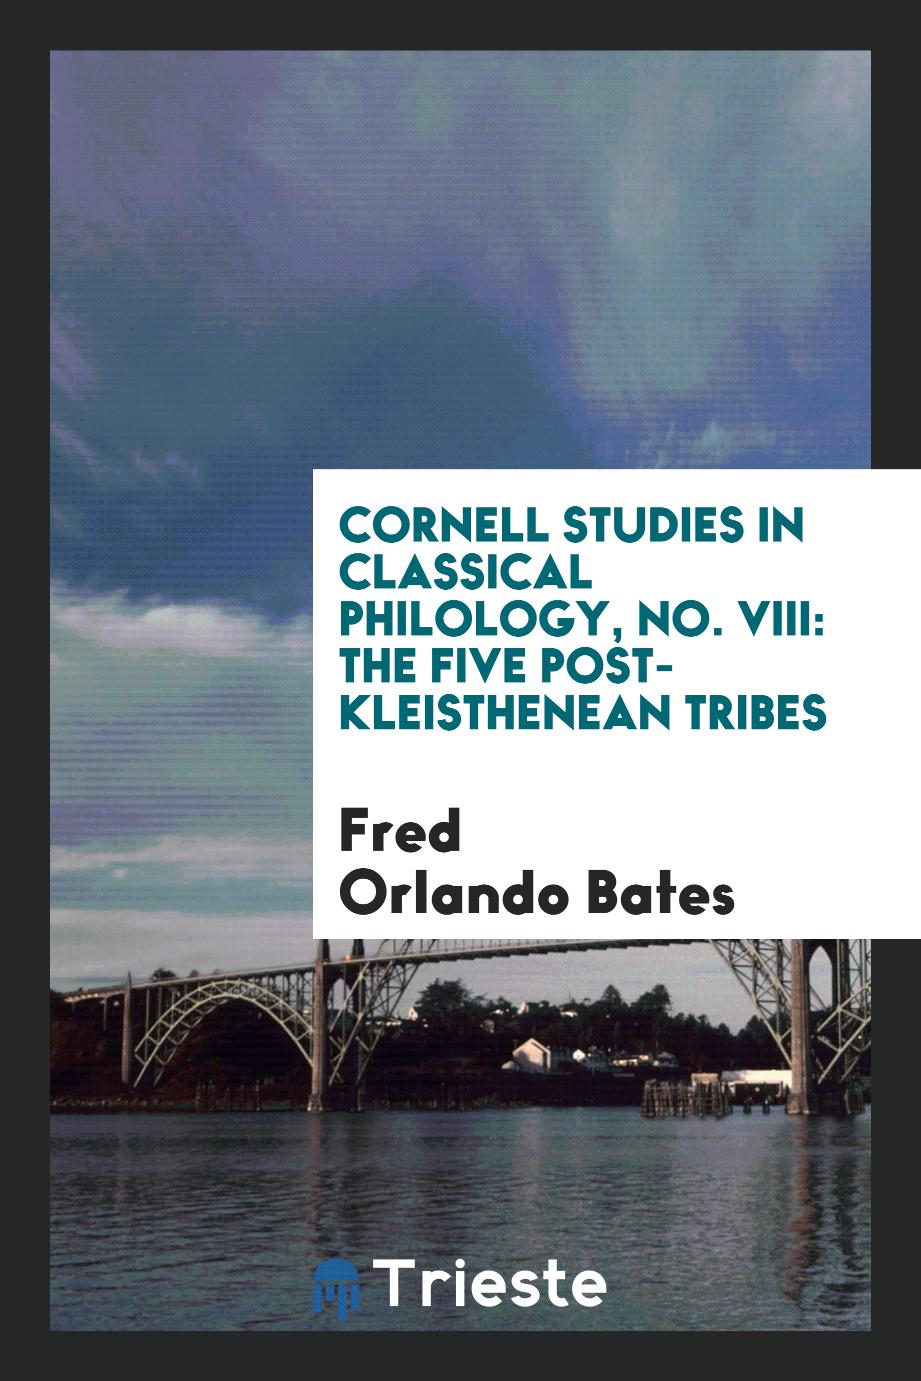 Cornell Studies in Classical Philology, No. VIII: The Five Post-Kleisthenean Tribes